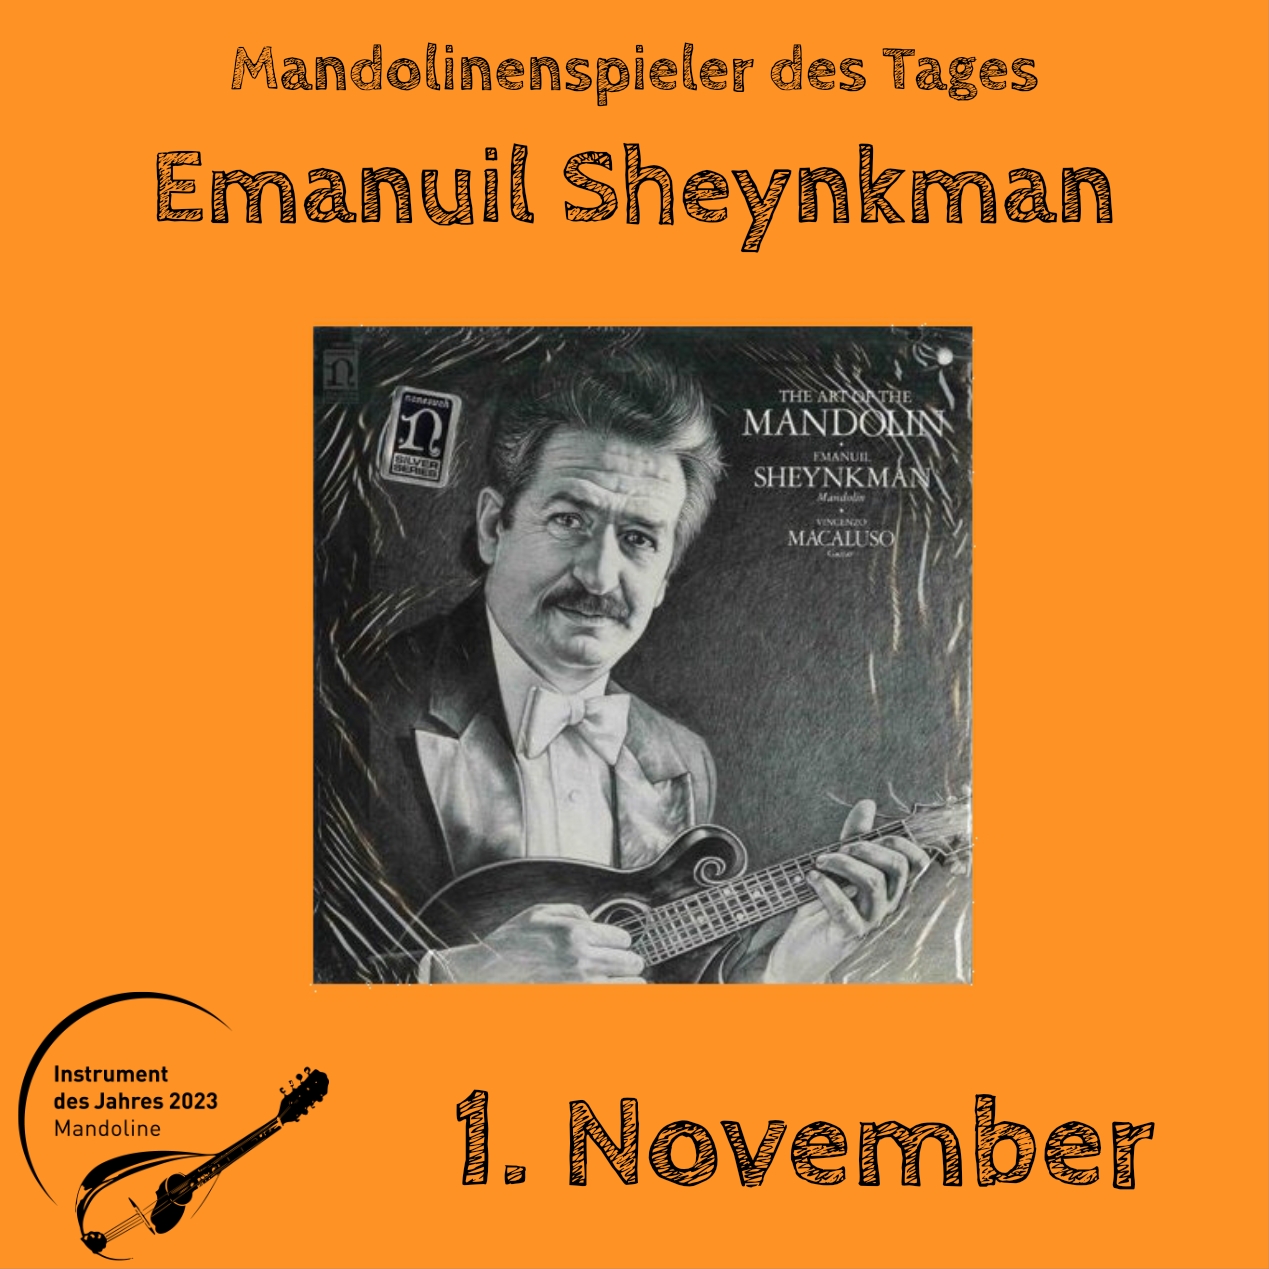 You are currently viewing 1. November – Emanuil Sheynkman